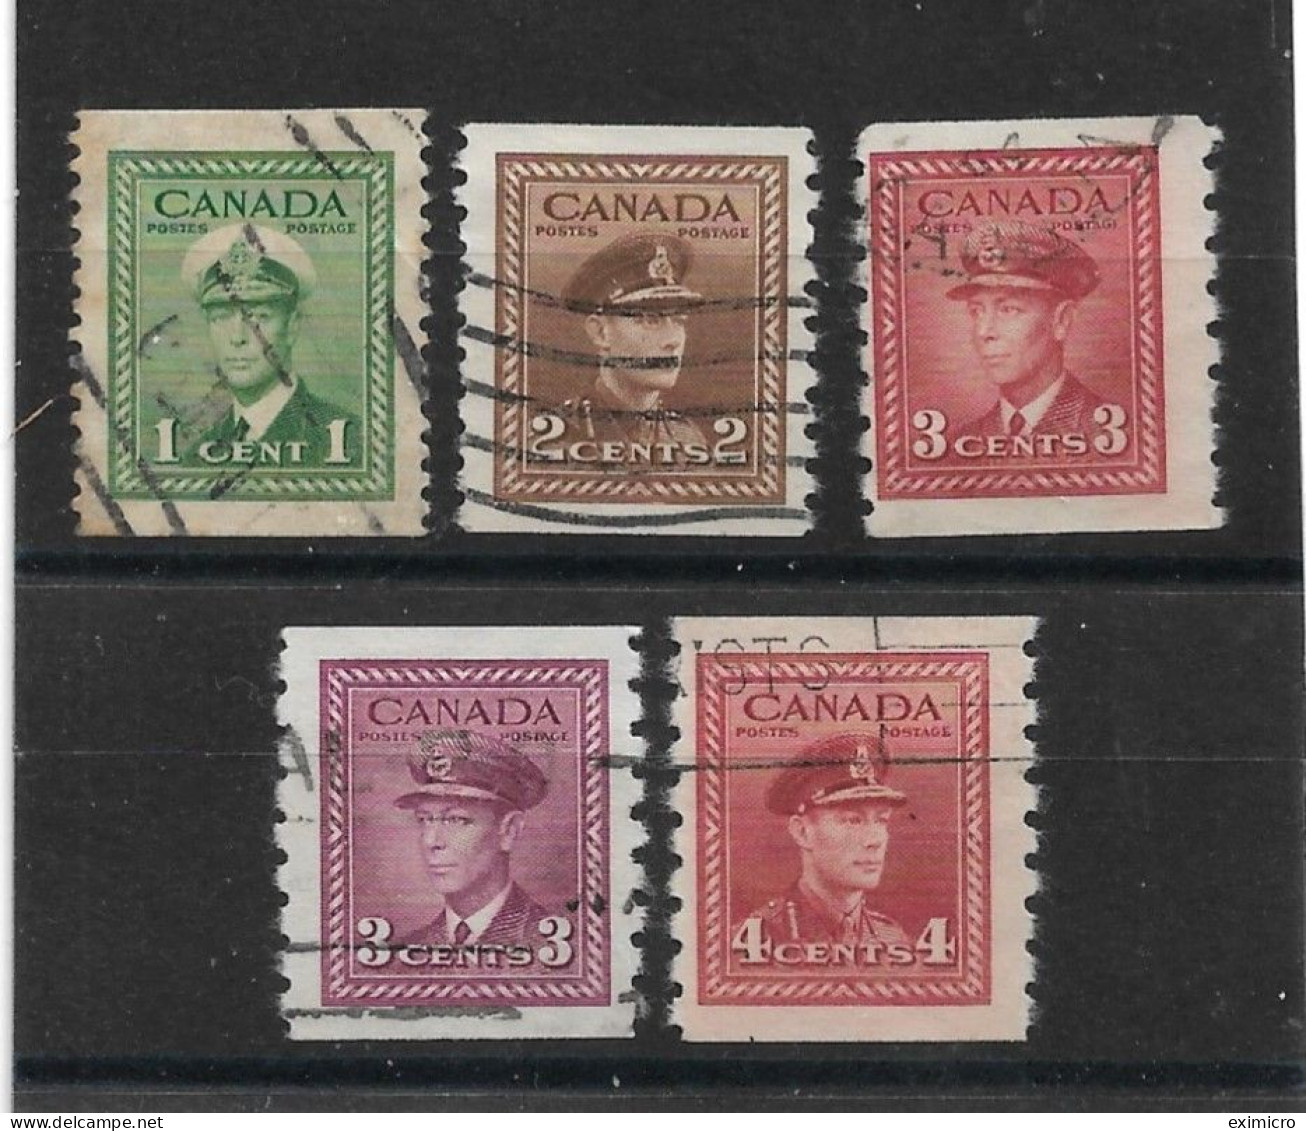 CANADA 1942 - 1943 COIL STAMPS SET IMPERF X PERF 8 SG 389/393 FINE USED Cat £26 - Usados